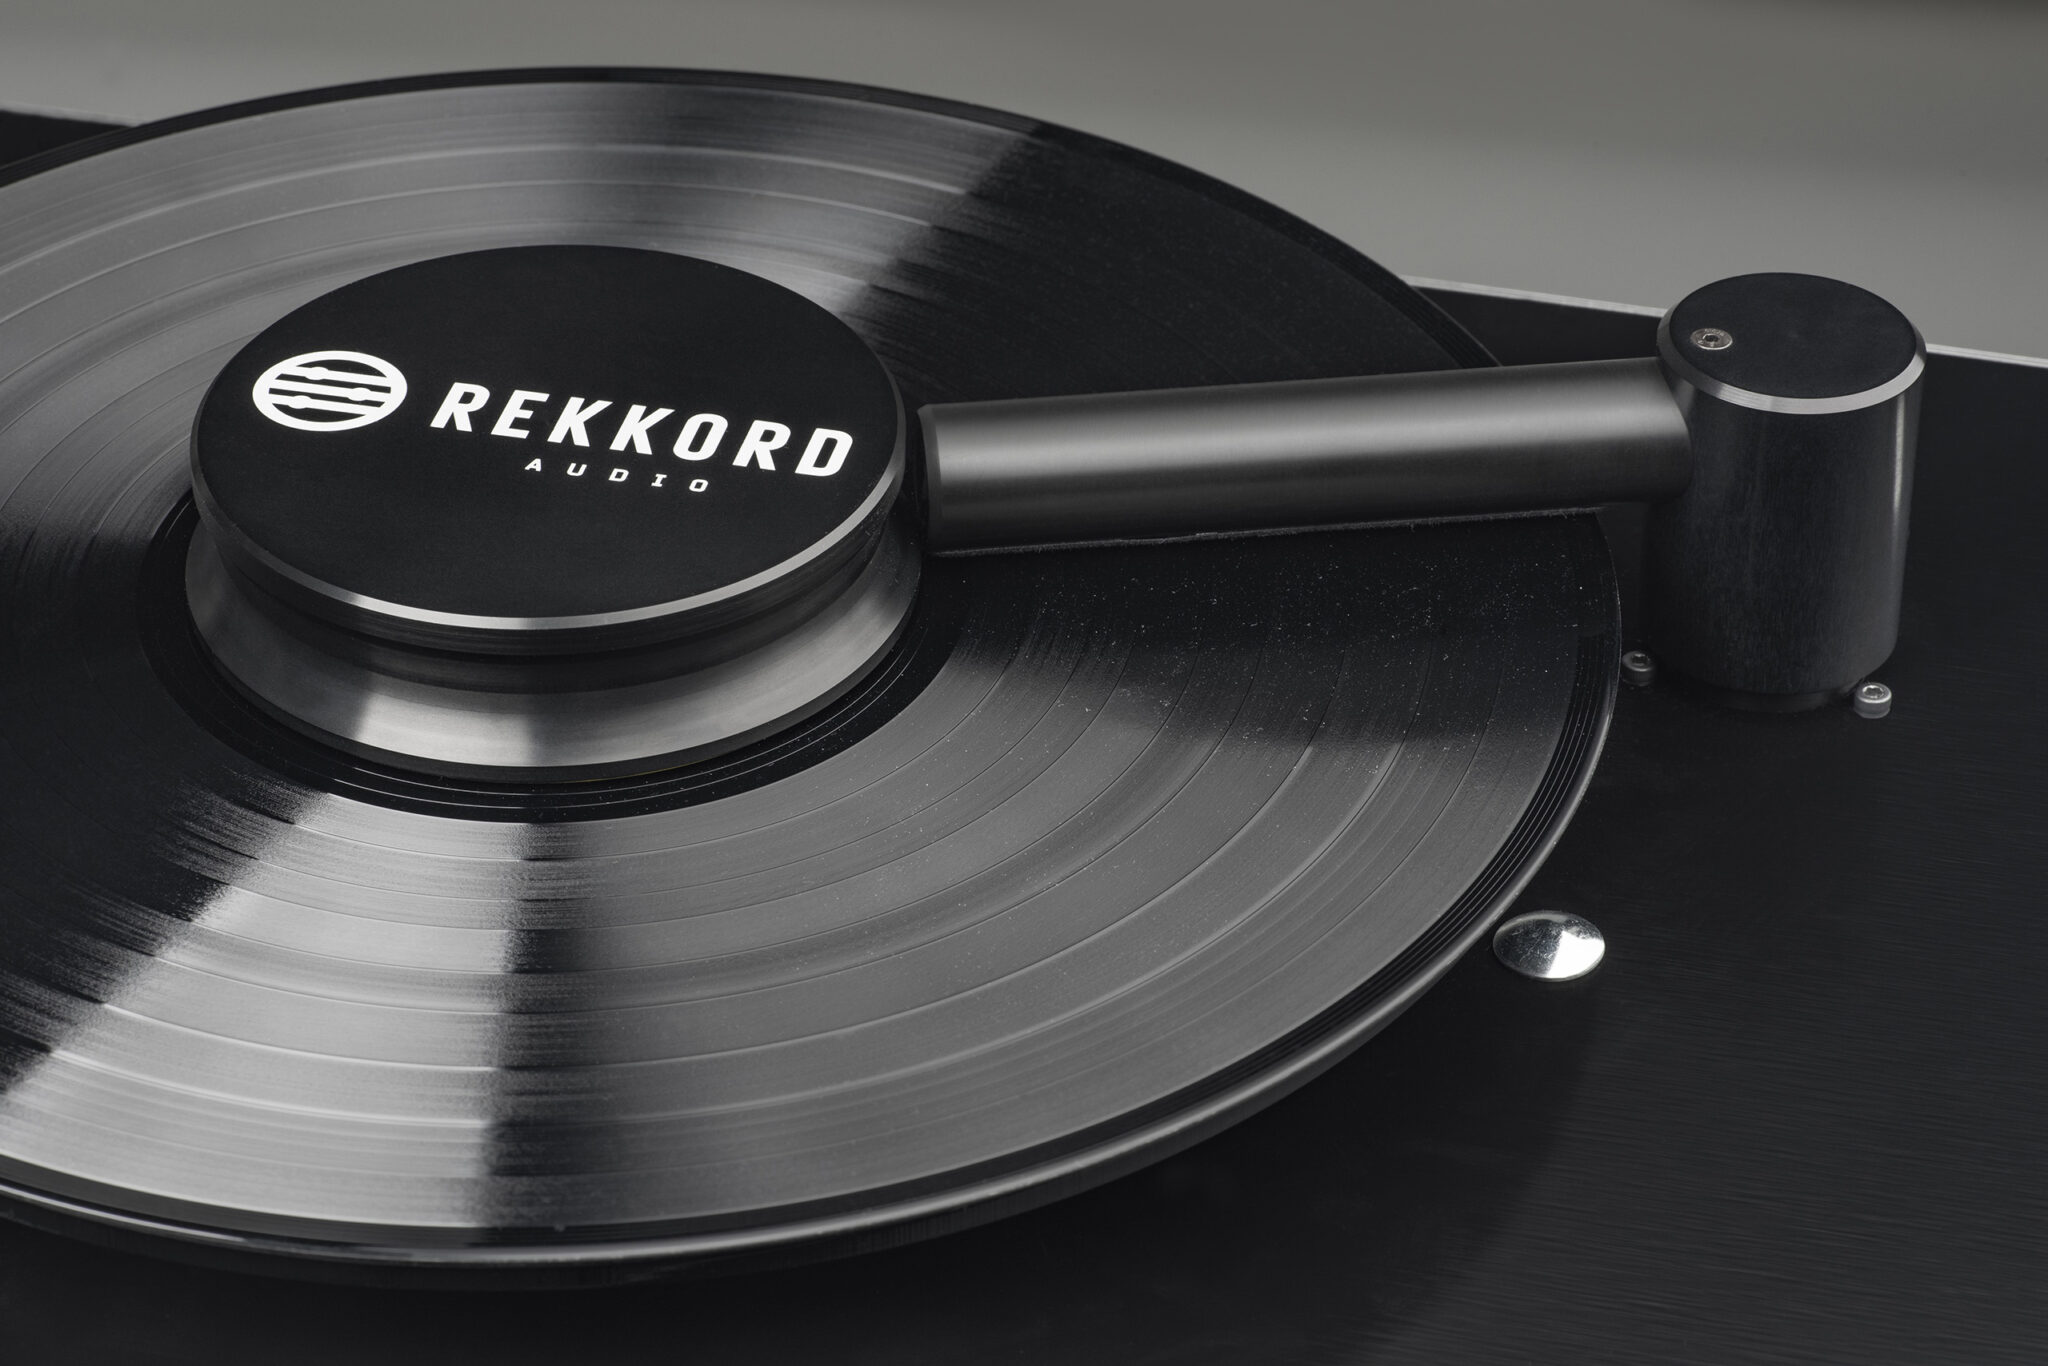 Keep your records spotless with Rekkord’s RCM cleaning machine